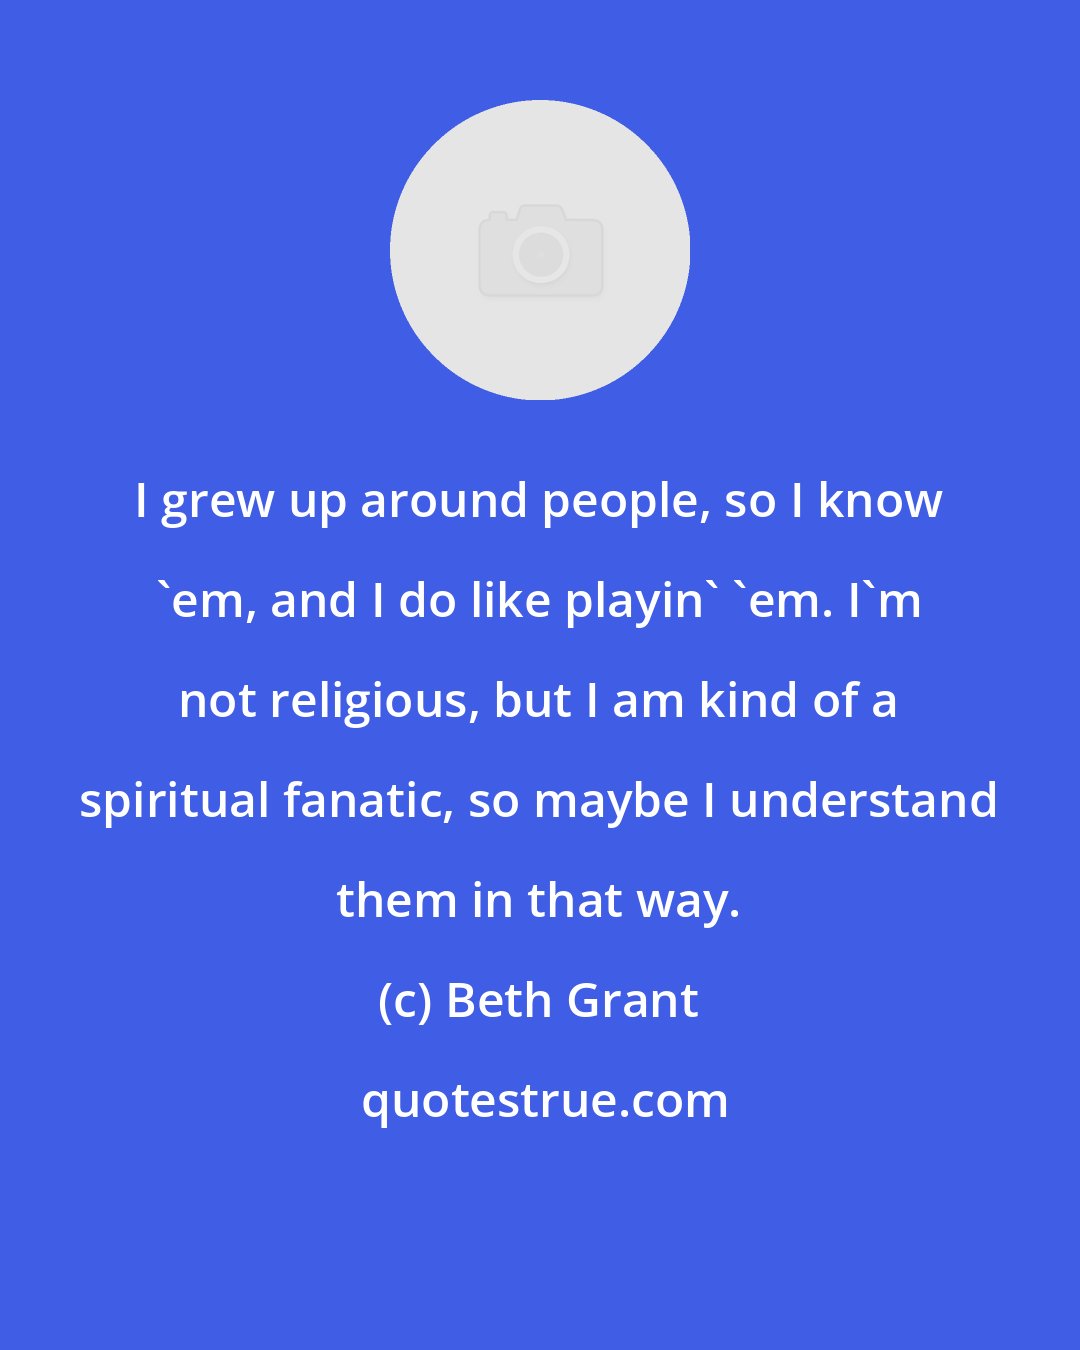 Beth Grant: I grew up around people, so I know 'em, and I do like playin' 'em. I'm not religious, but I am kind of a spiritual fanatic, so maybe I understand them in that way.